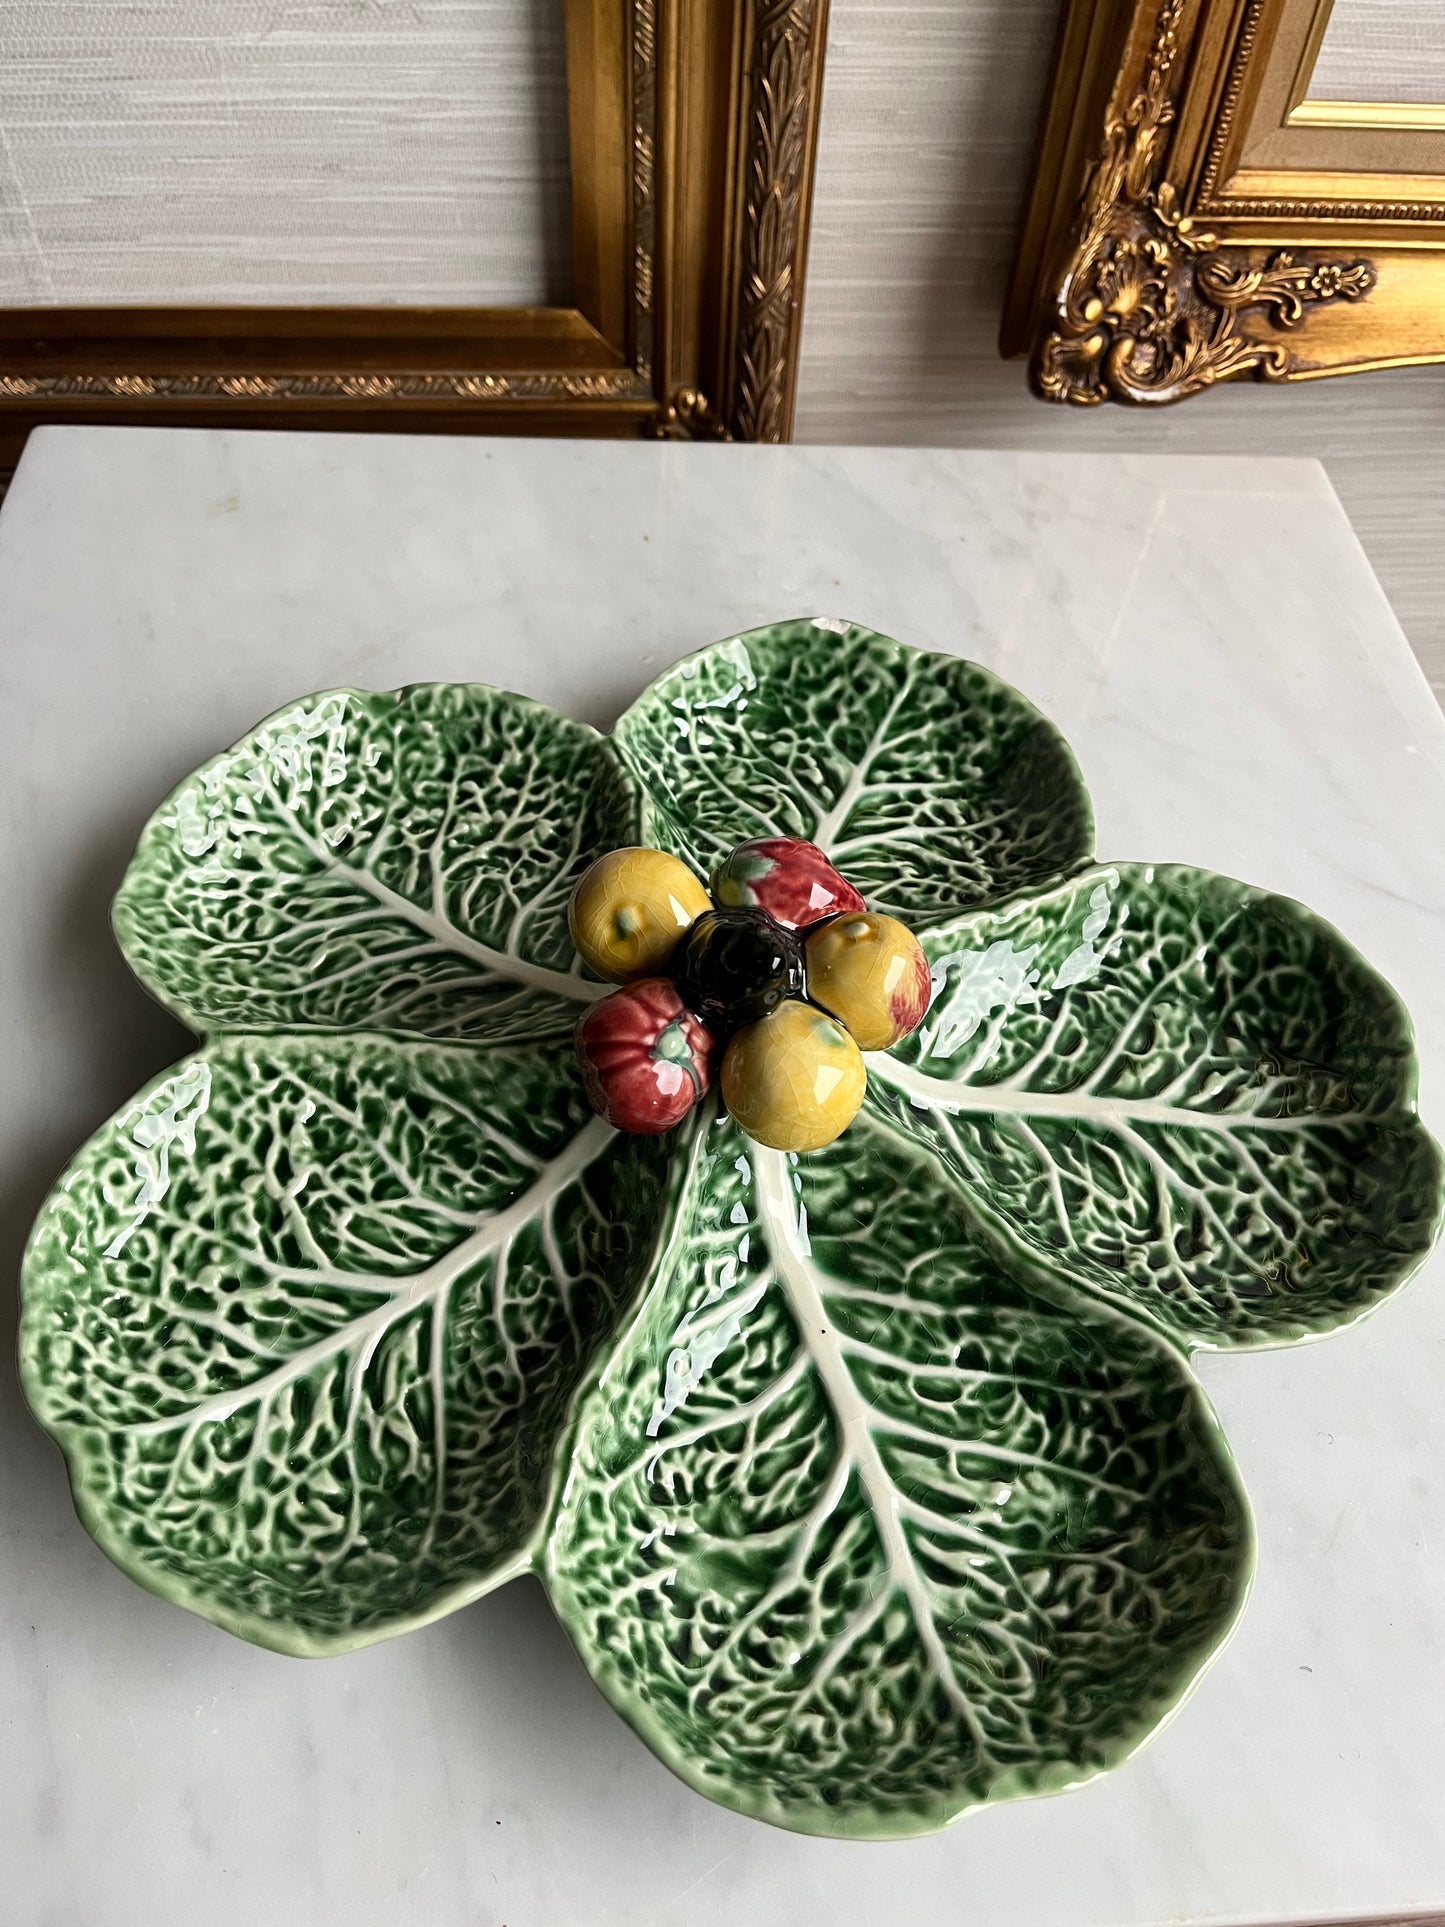 1960s Bordallo Pinheiro Cabbage and Fruits Majolica Platter in Barbott Earthenware With 5 Compartments